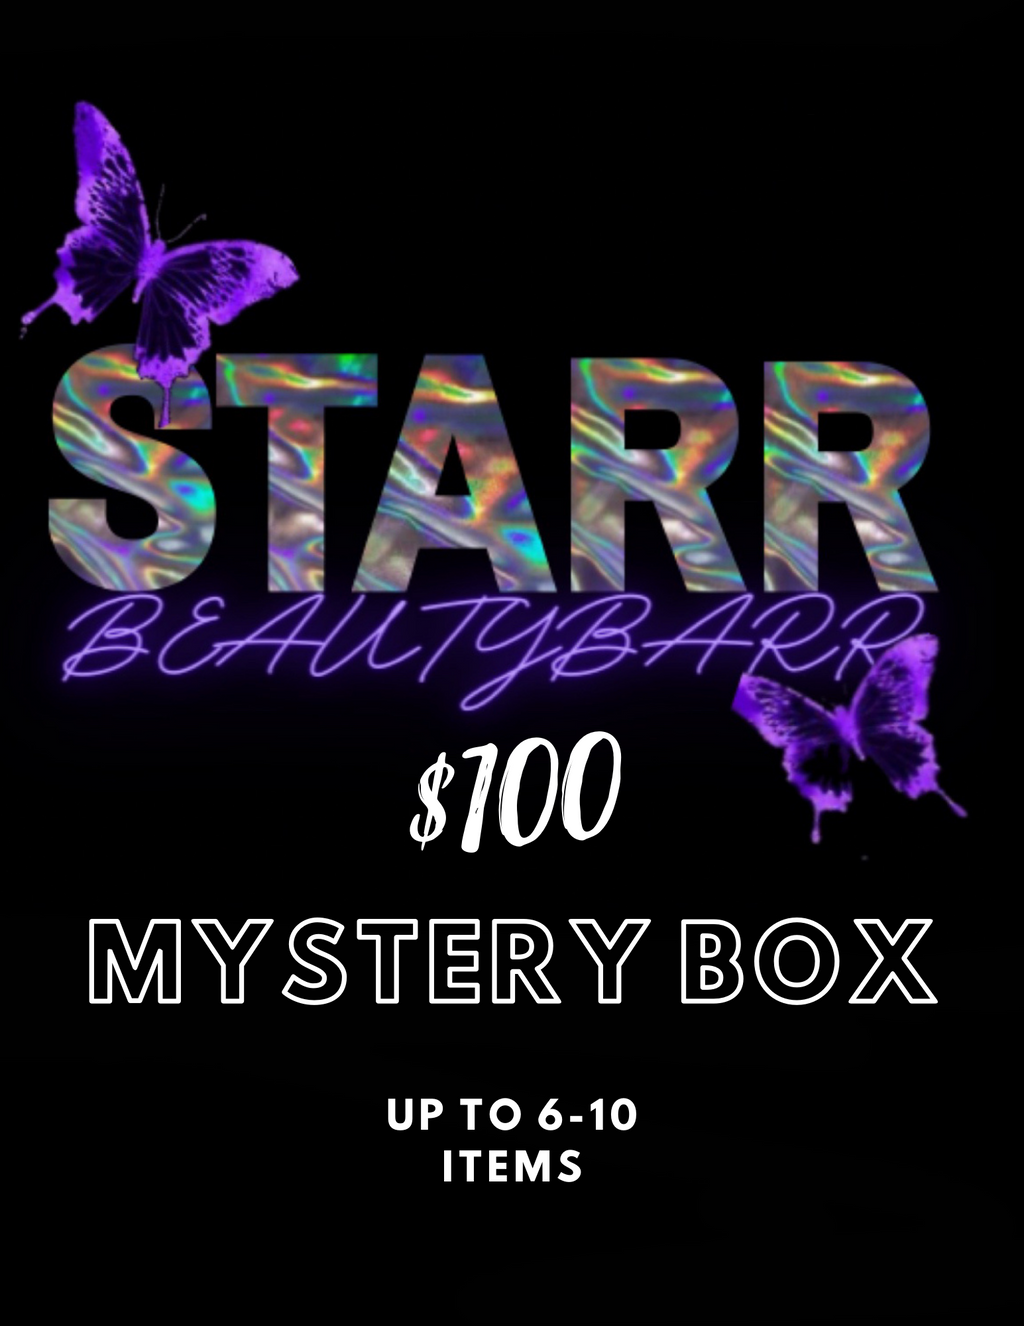 Exclusive $100 Mystery Box